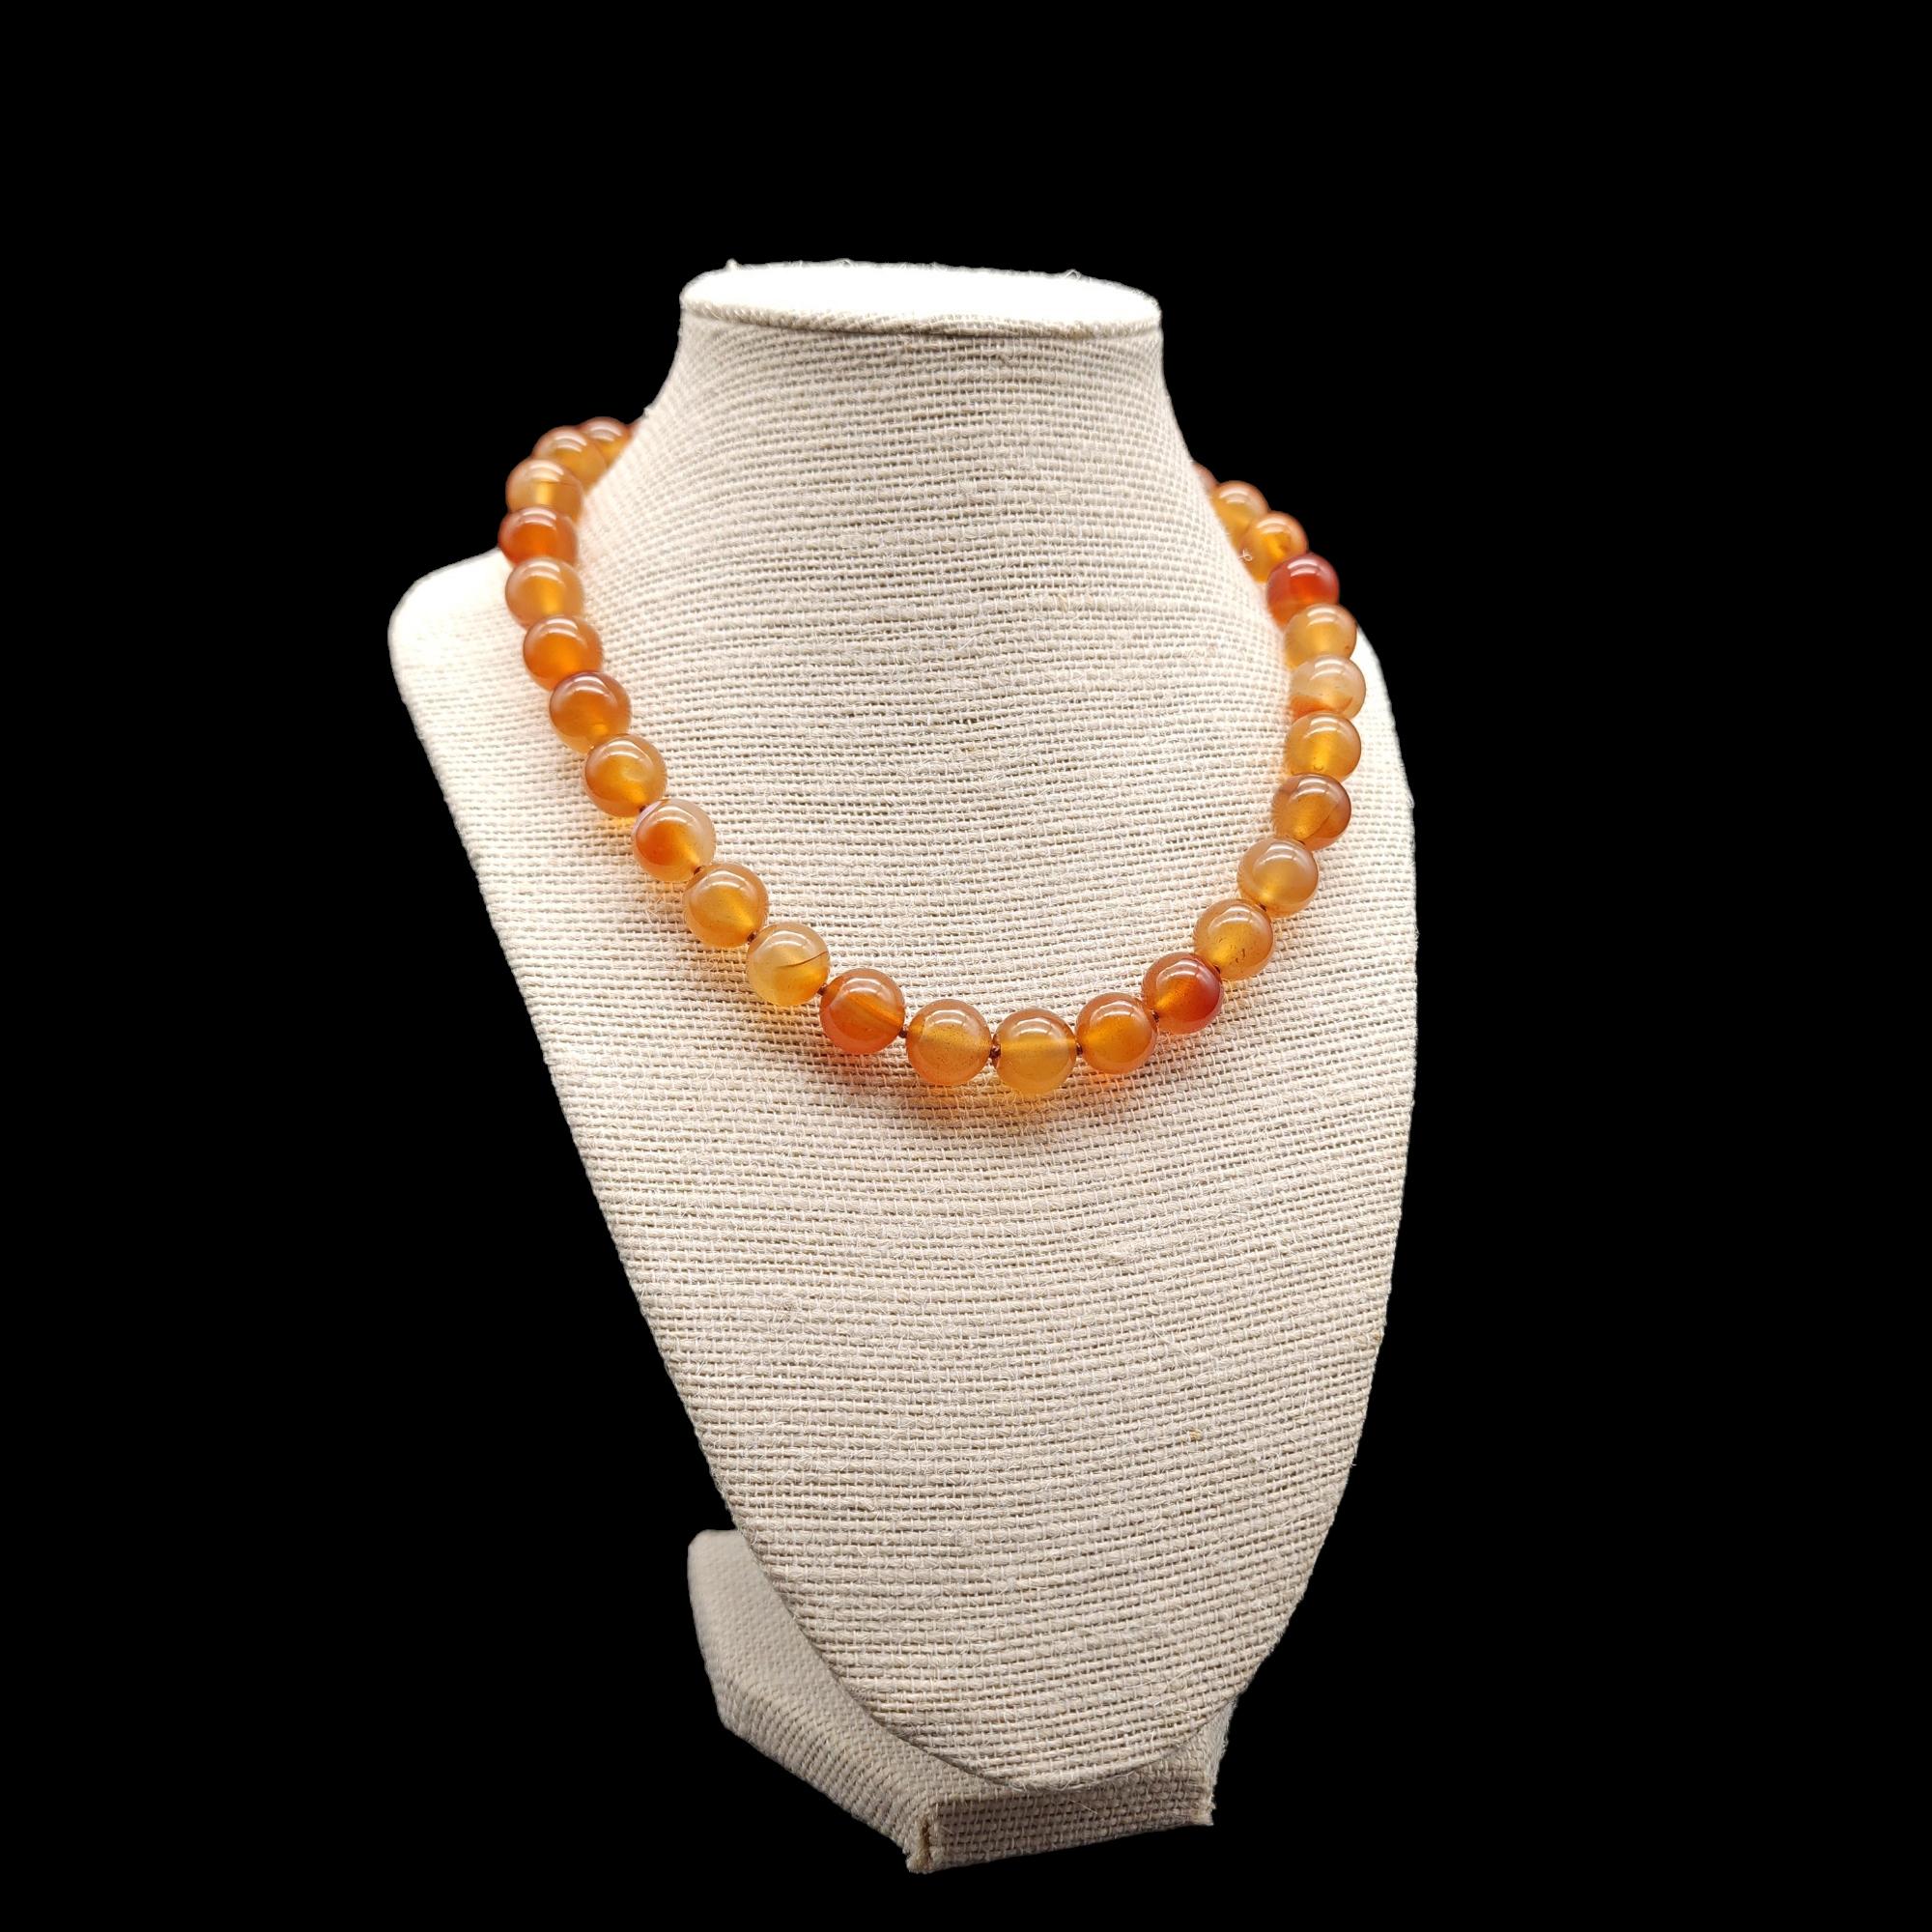 This necklace is a vintage piece that features polished carnelian beads and a sterling silver clasp. It’s designed to be worn as a collar necklace and is in excellent condition. The carnelian beads are polished to a high shine, and the sterling